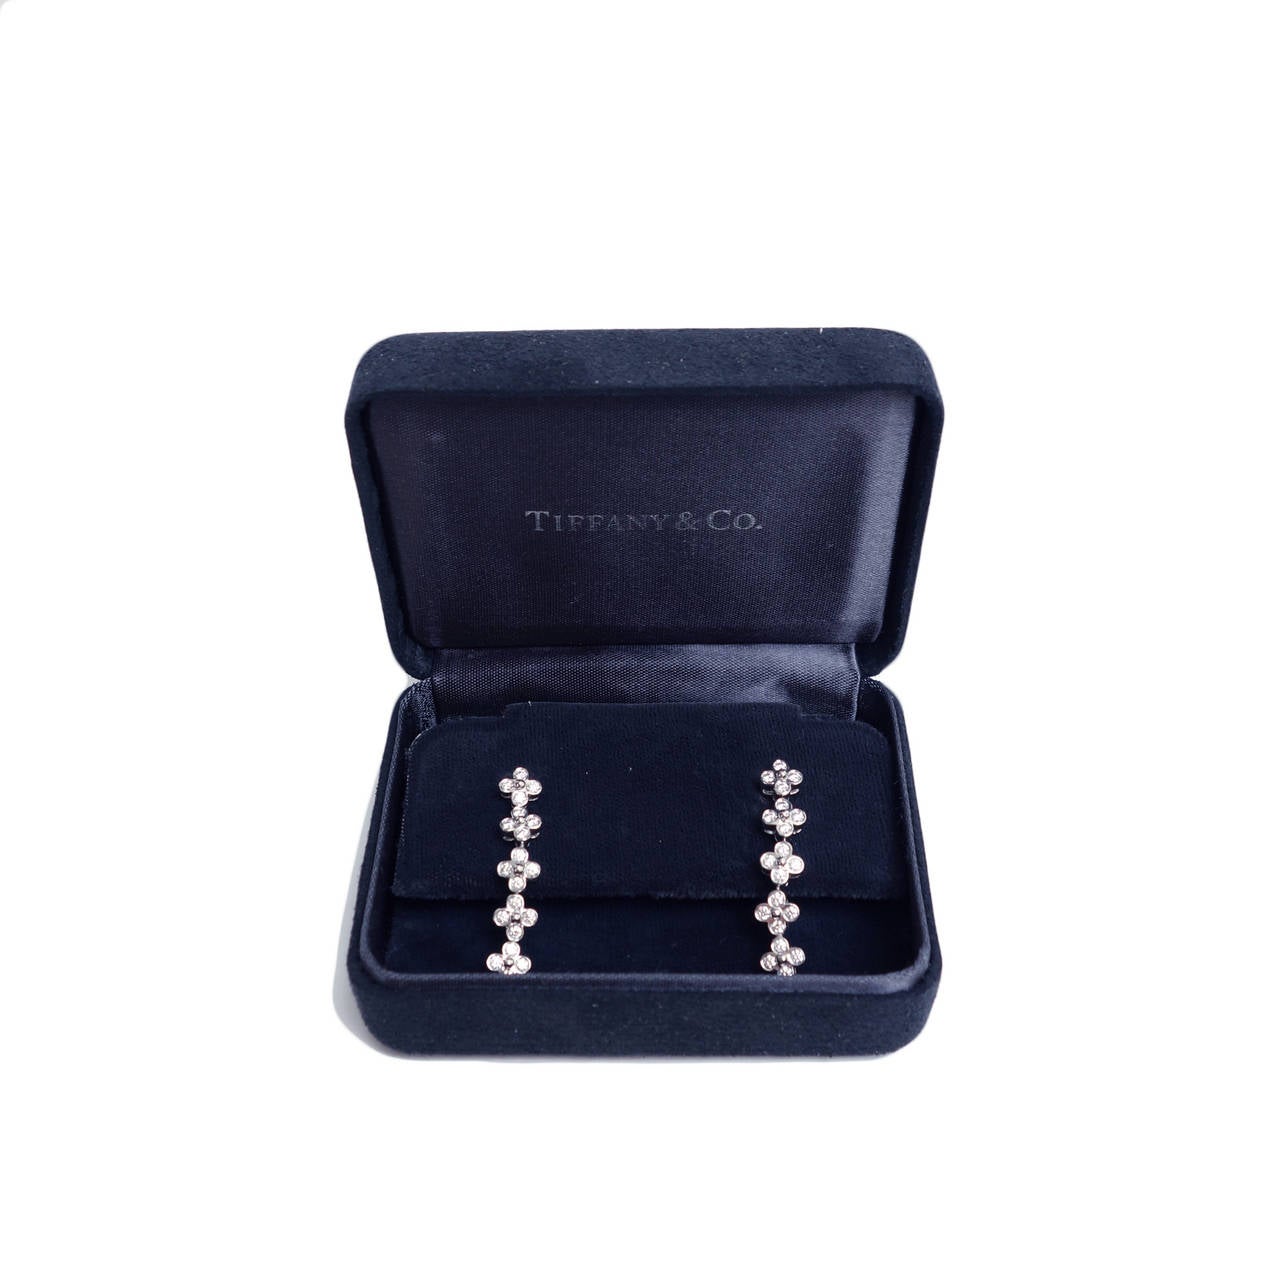 Tiffany & Co. Platinum Lace drop diamond earrings.  Each earring features 5 floret designs linked by small platinum jump rings which makes the earrings flexible.  There are 20 round brilliant cut diamonds in each earring. The total carat weight of